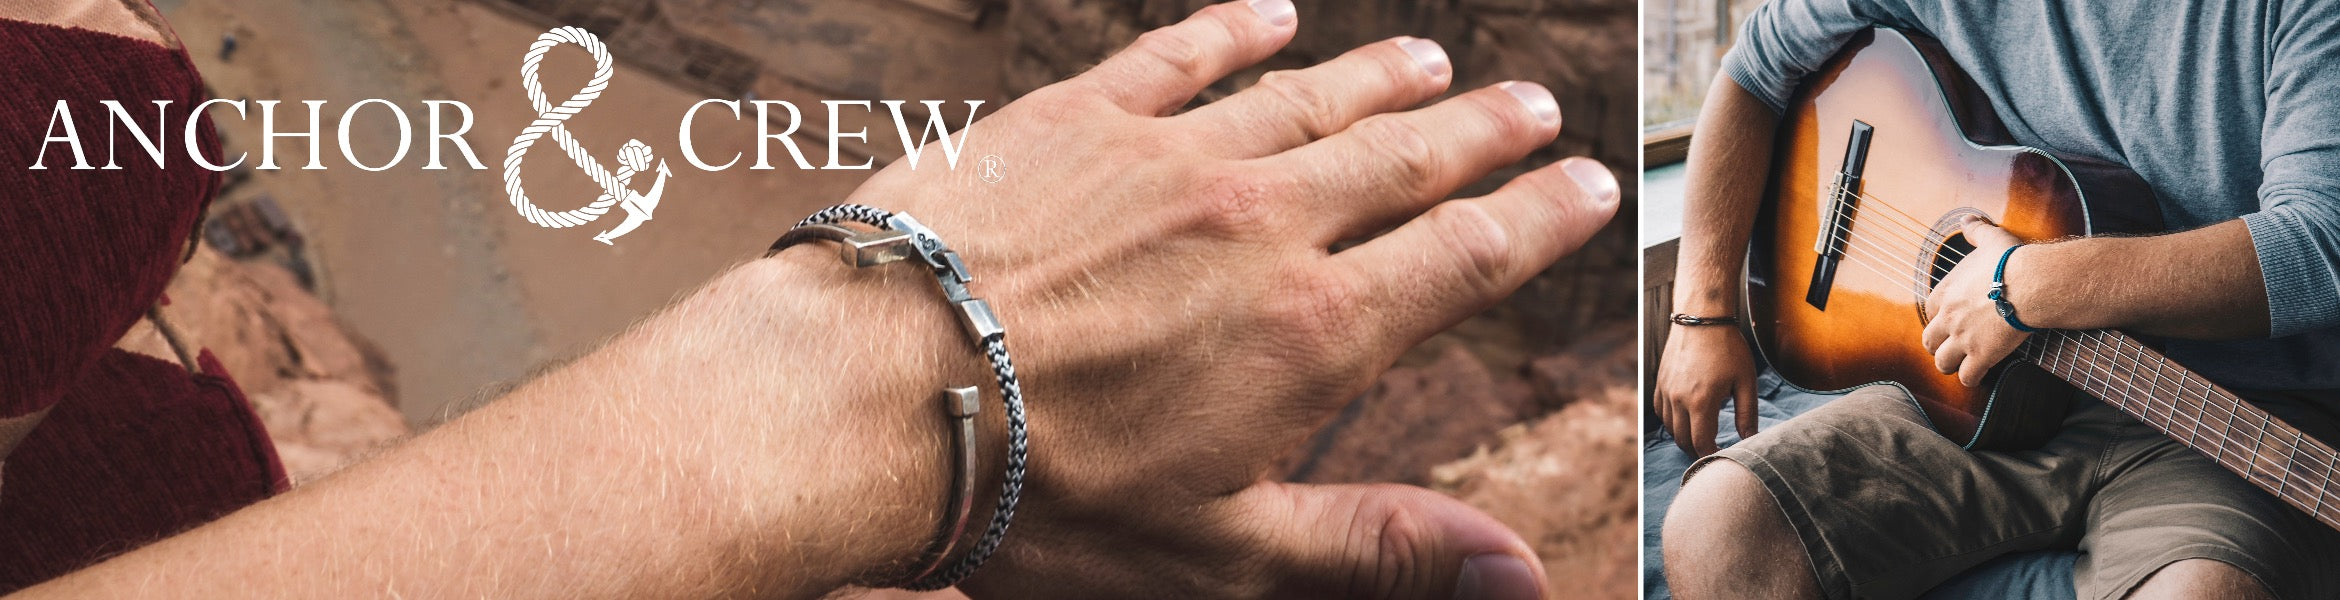 ANCHOR & CREW | MEN'S BRACELETS & NECKLACES | HAND-MADE IN ENGLAND